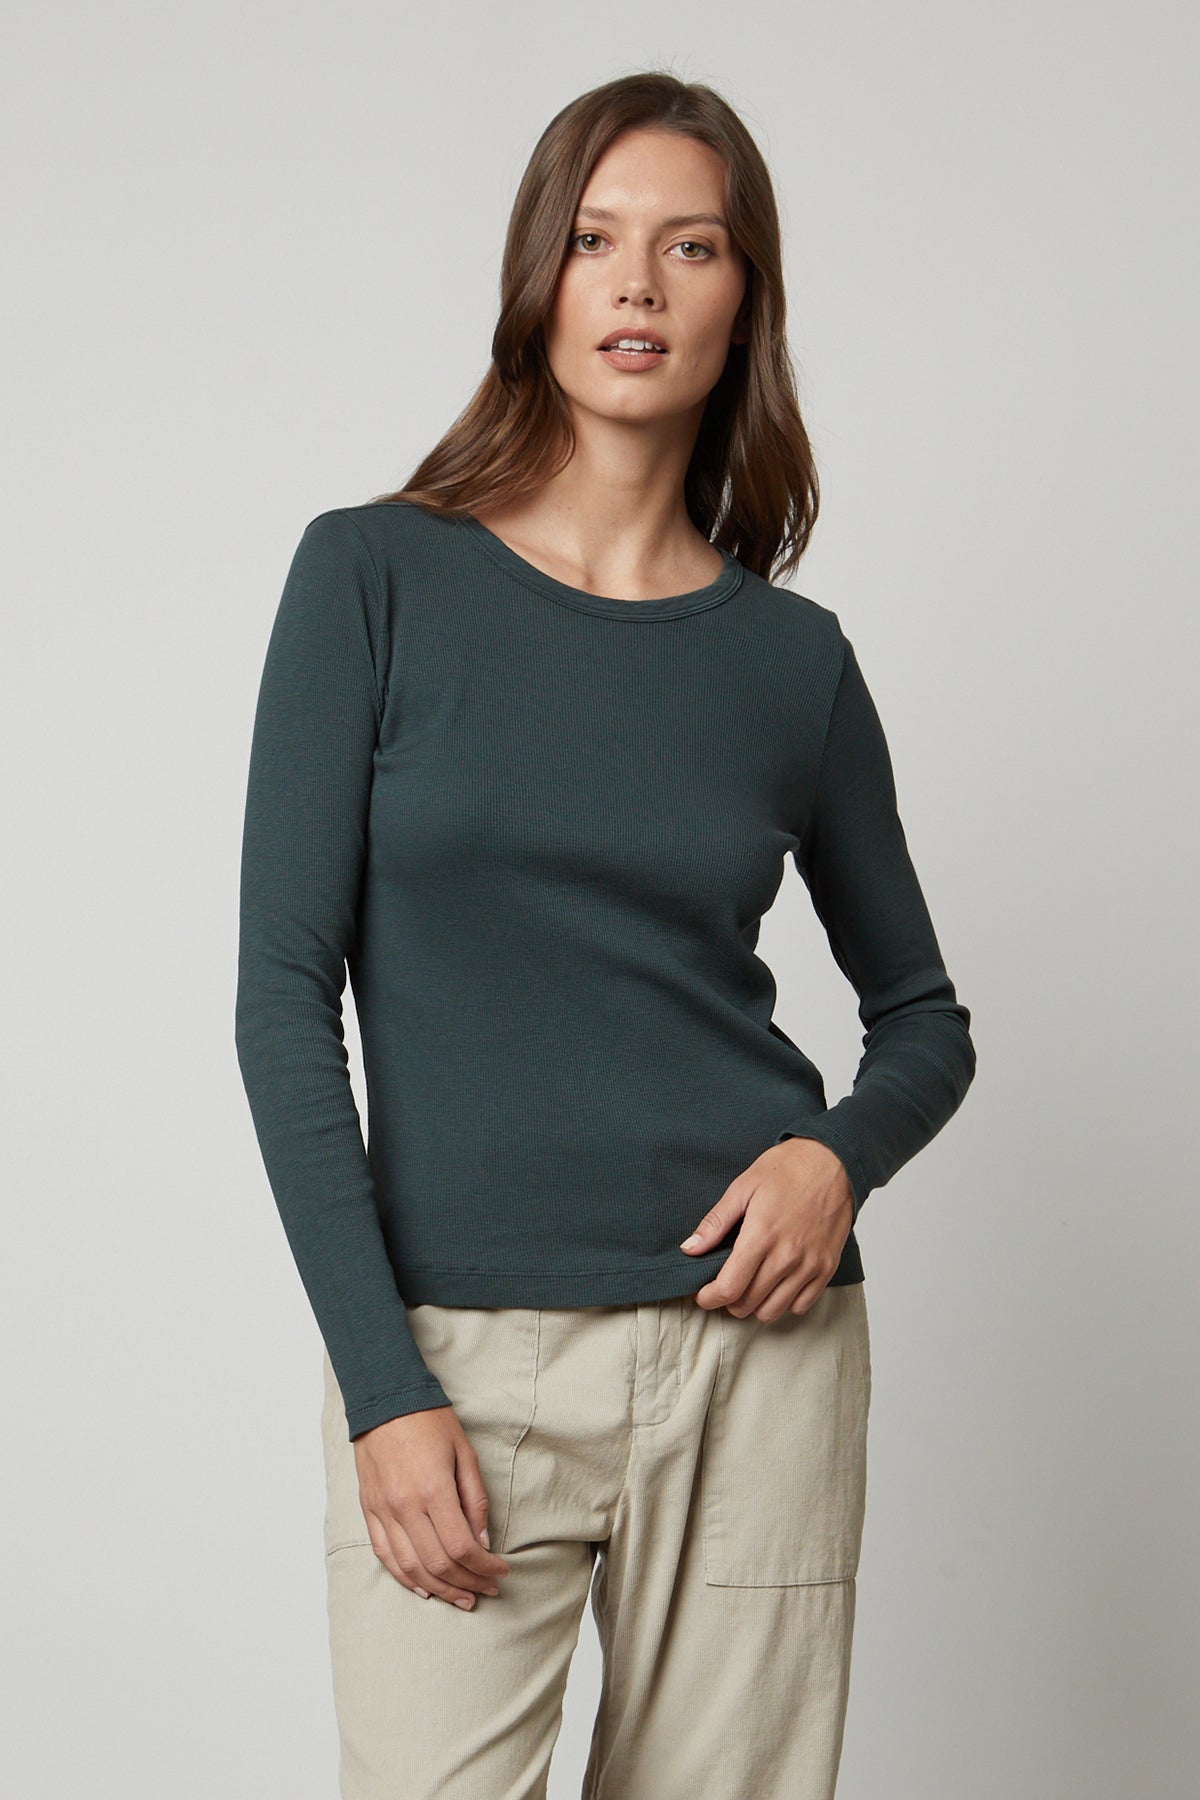 A woman wearing the Velvet by Graham & Spencer BAYLER RIBBED SCOOP NECK TEE and khaki pants.-35782696566977